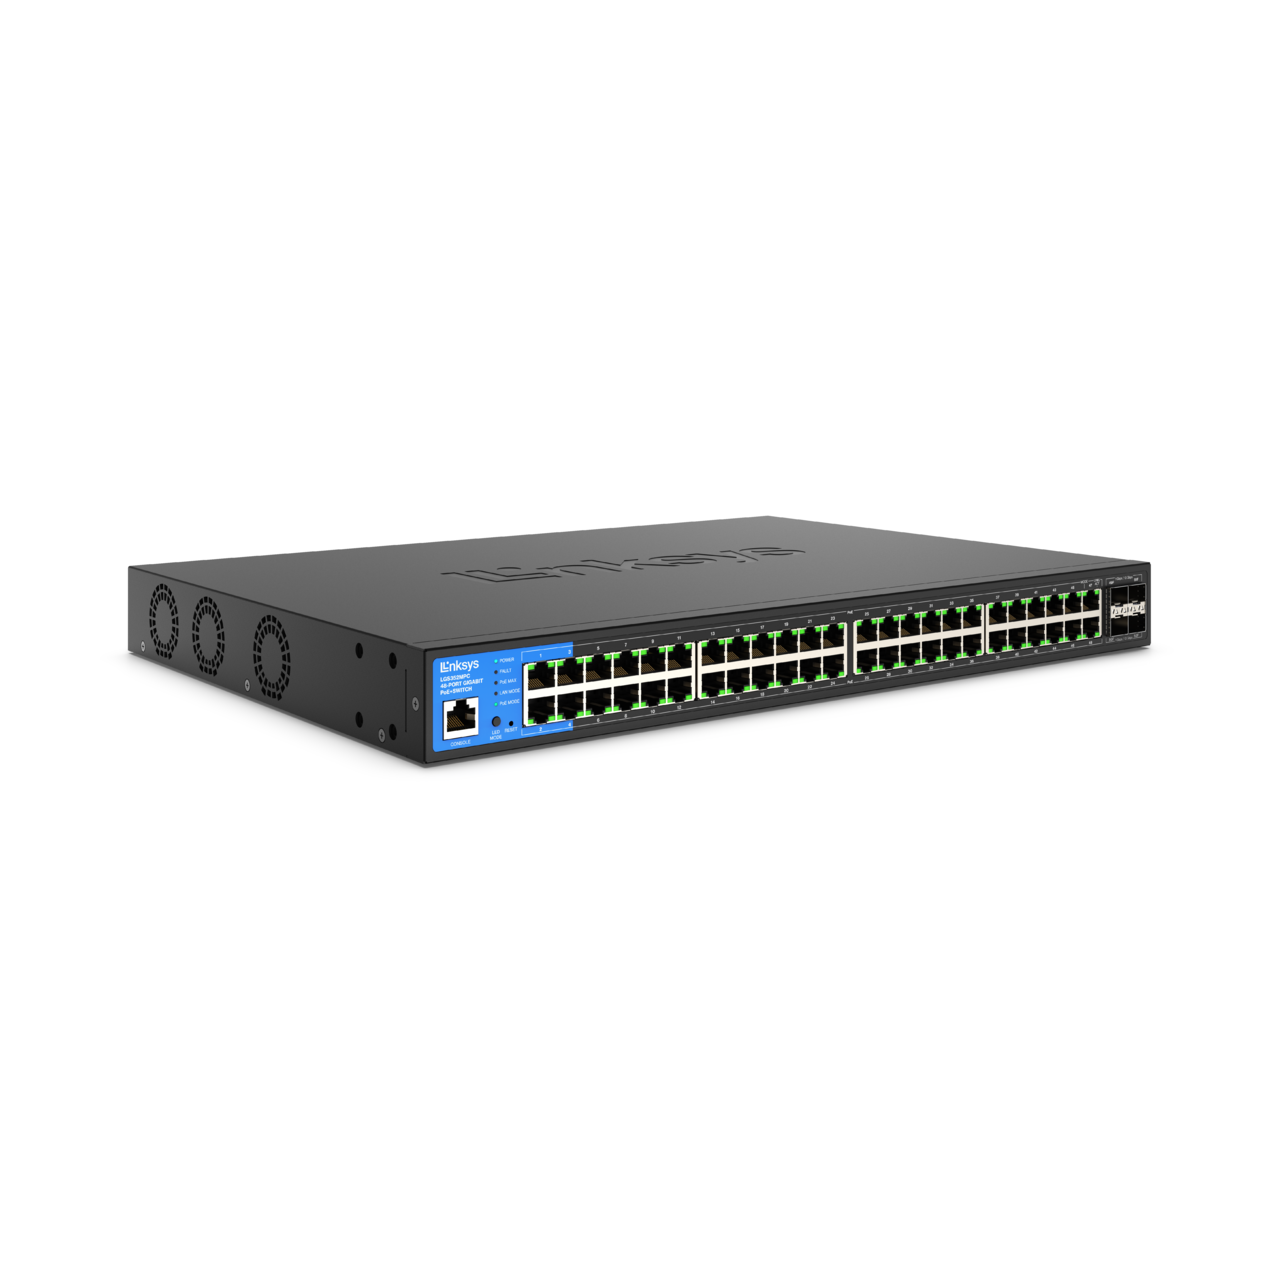 8-Port Gigabit Ethernet 380W PoE+ Switch with 4 Uplink Ports and LCD Screen  (Refurbished)